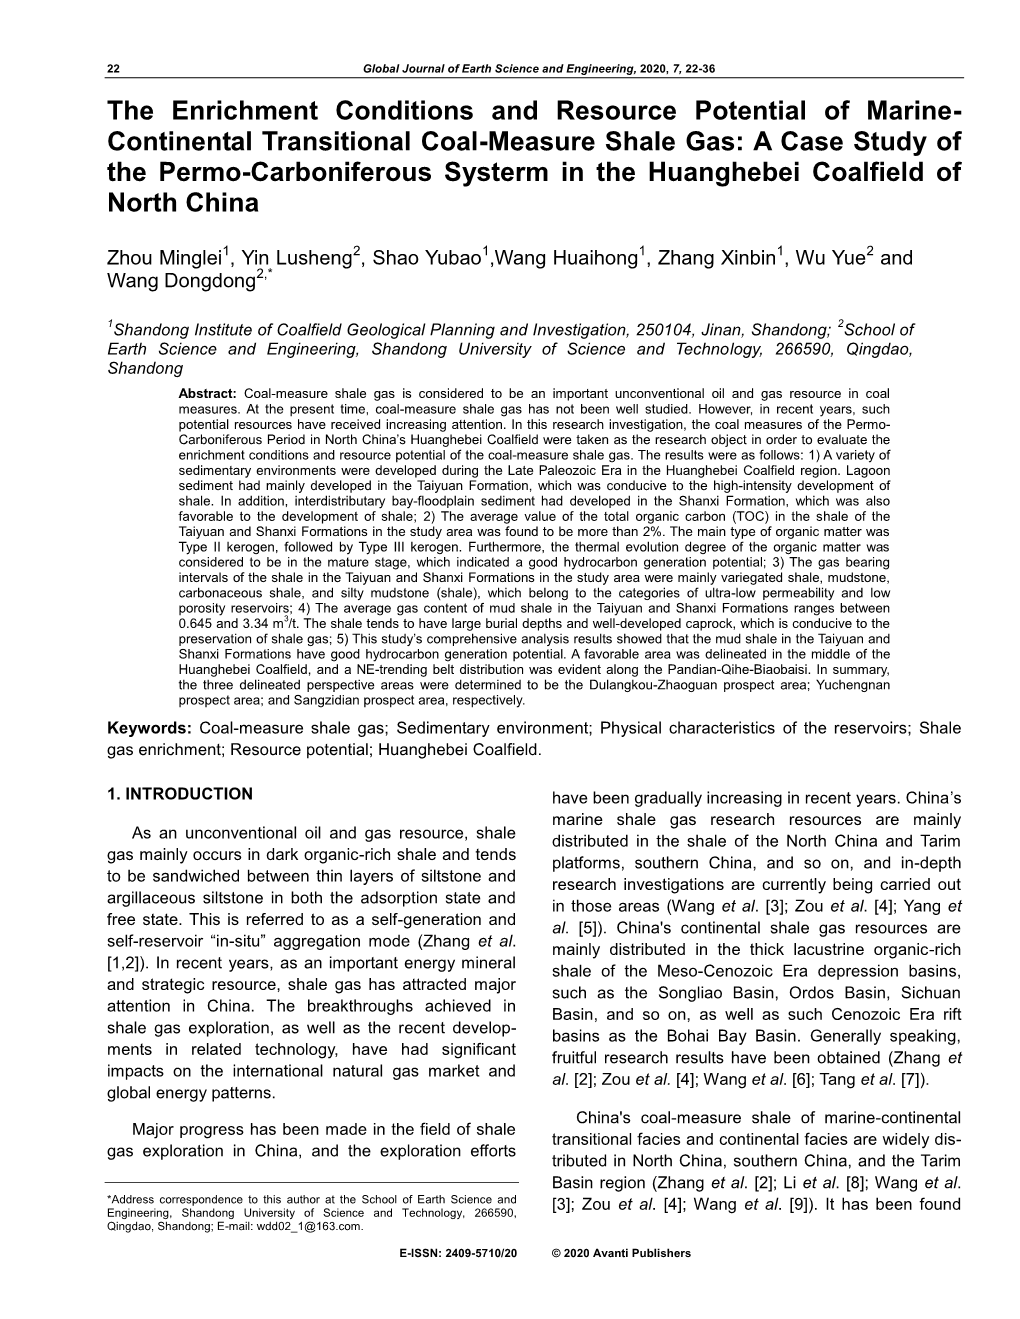 Continental Transitional Coal-Measure Shale Gas: a Case Study of the Permo-Carboniferous Systerm in the Huanghebei Coalfield of North China